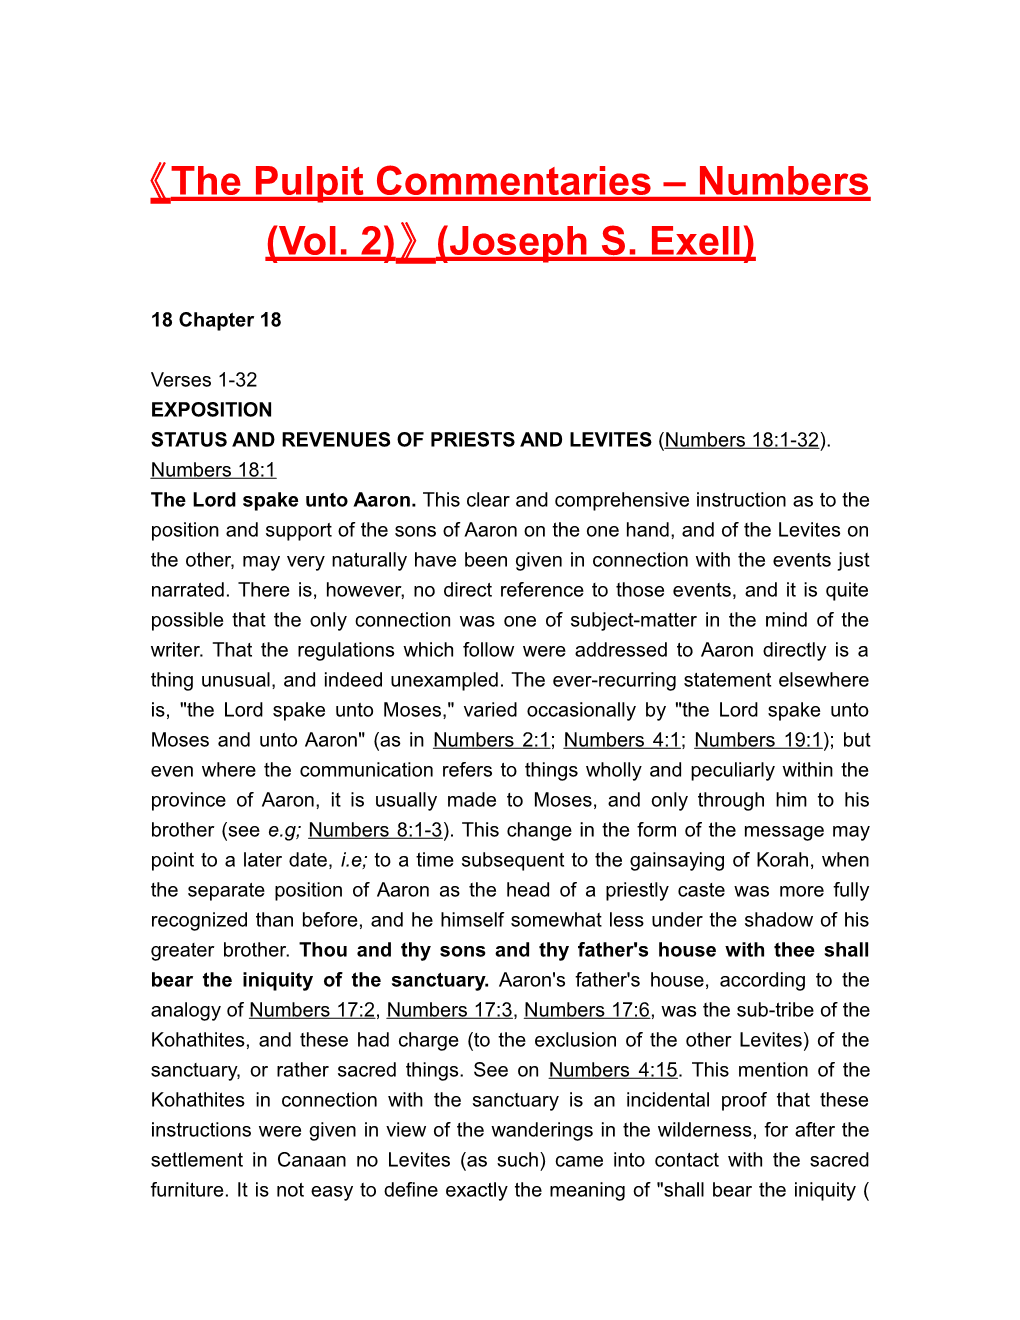 The Pulpit Commentaries Numbers (Vol. 2) (Joseph S. Exell)